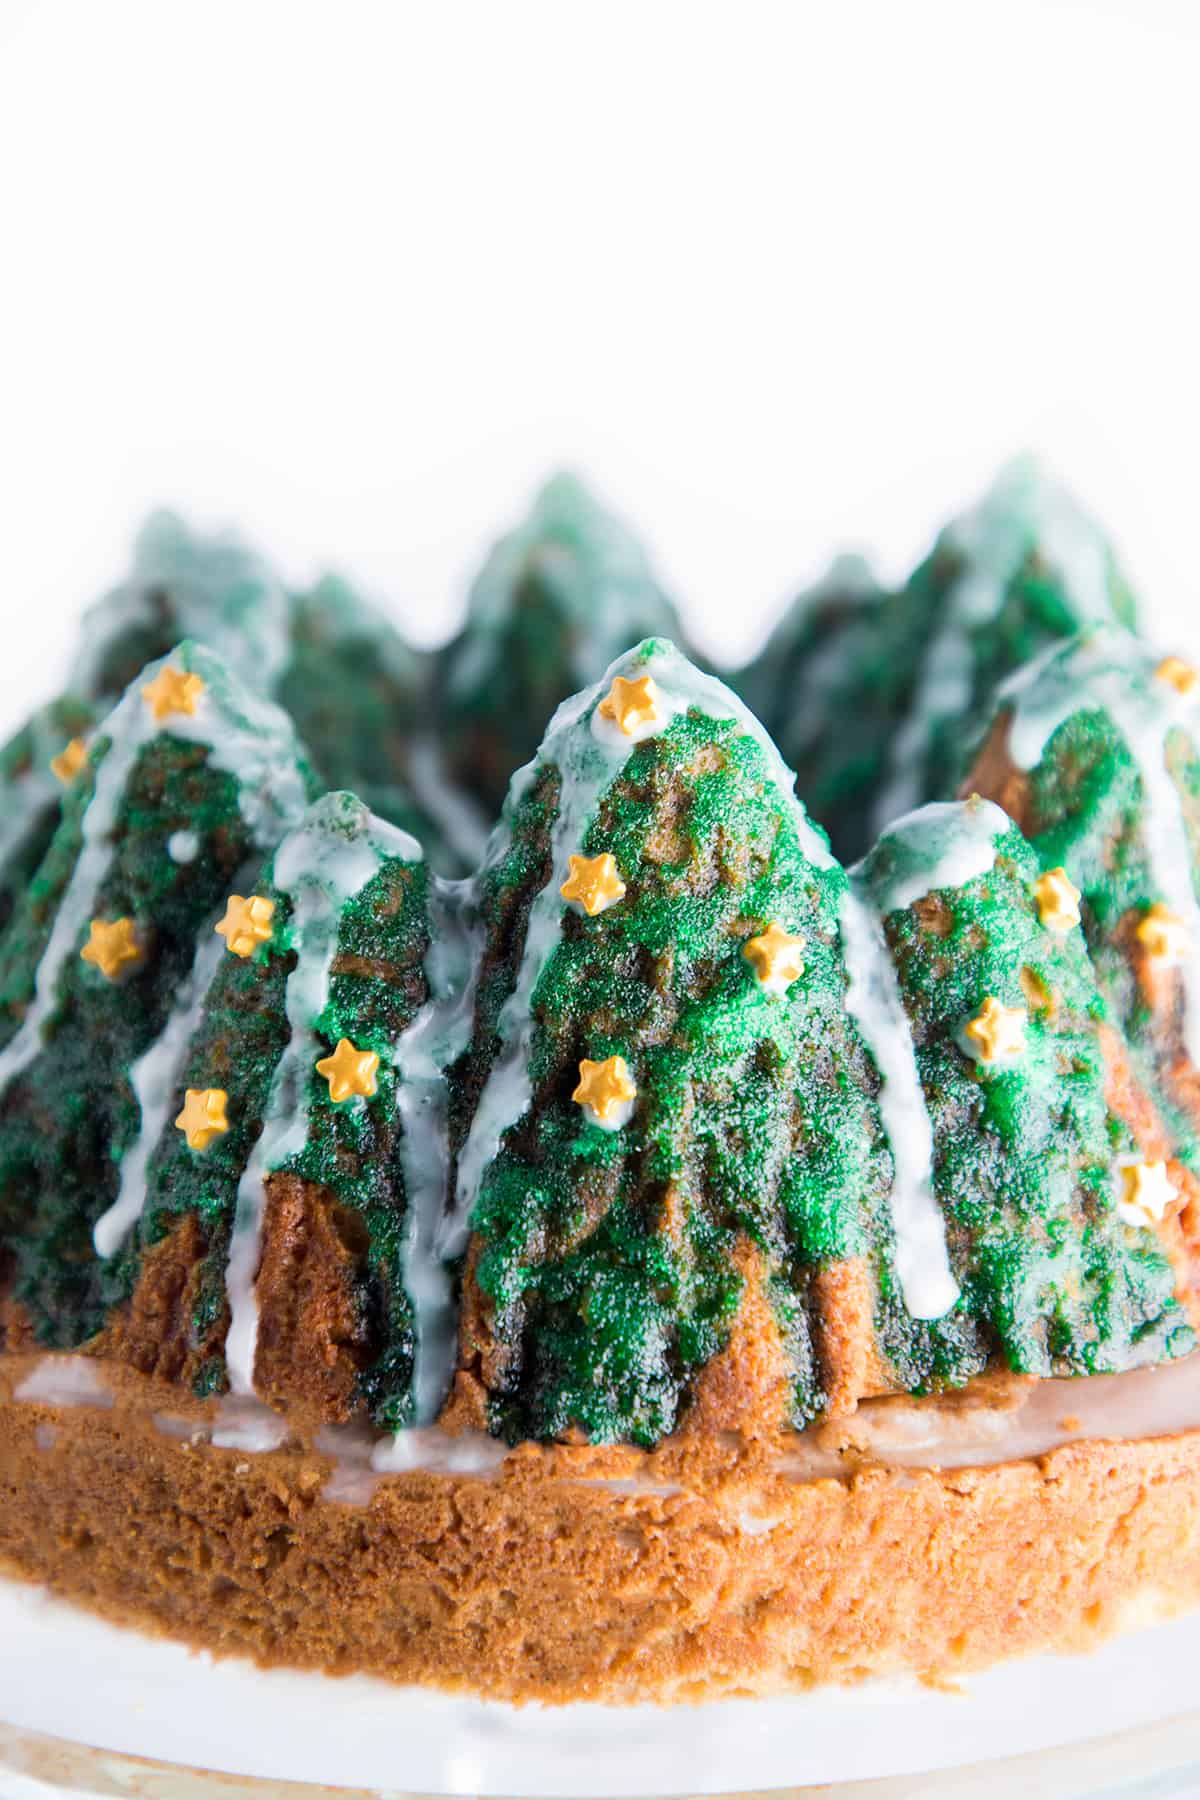 Christmas tree cake you have to try this year! - YouTube